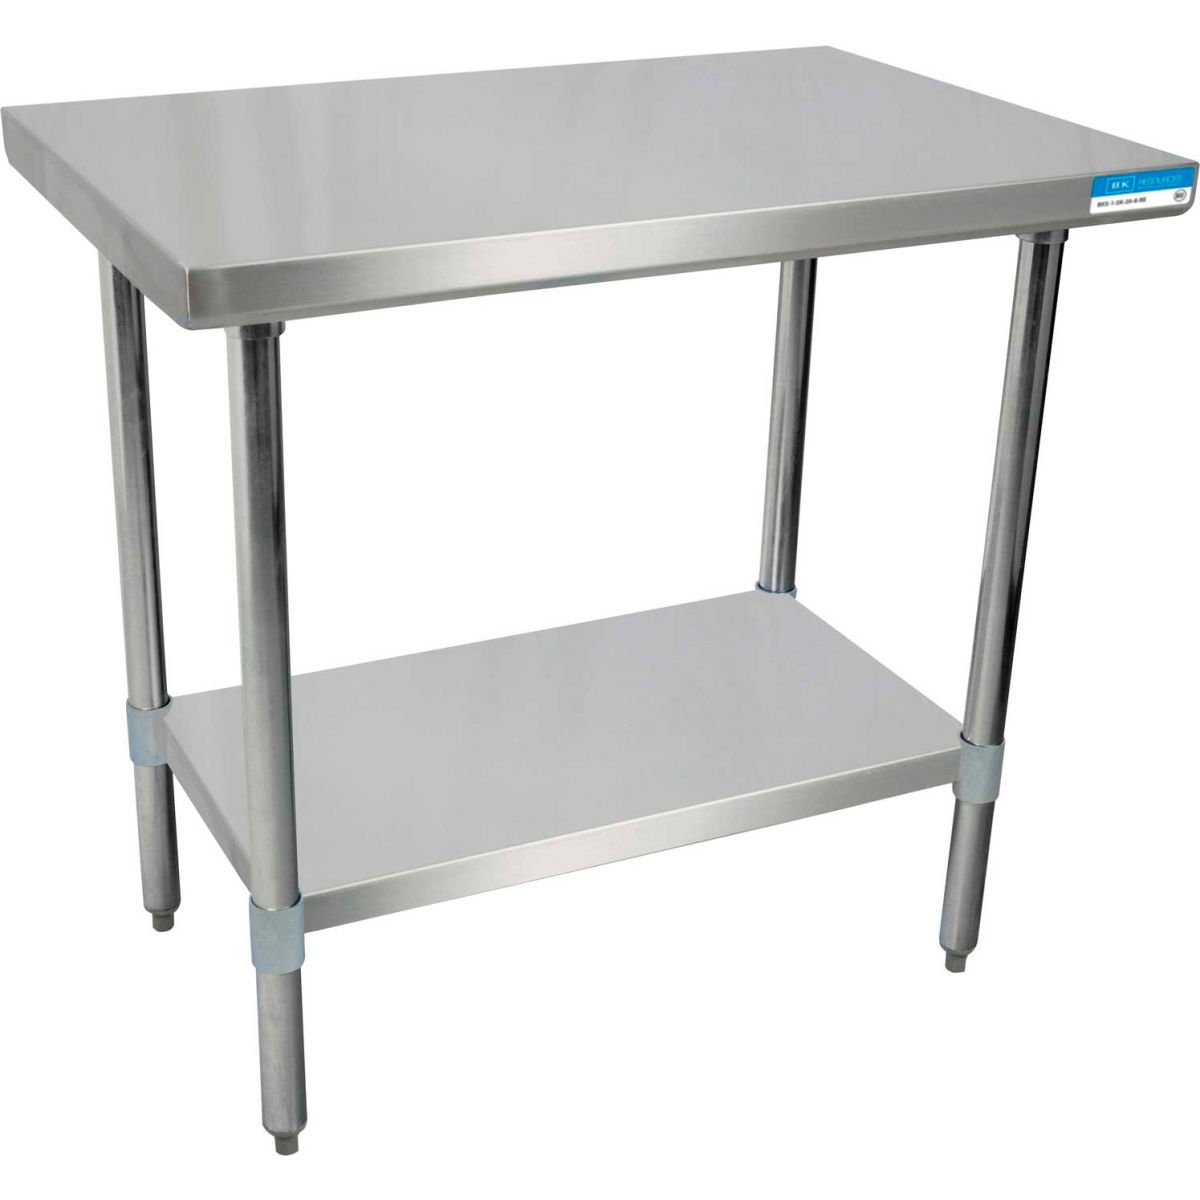 Picture of BK Resources B1516236 18 Gauge 430 Series Stainless Workbench with Undershelf - 60 x 18 in.